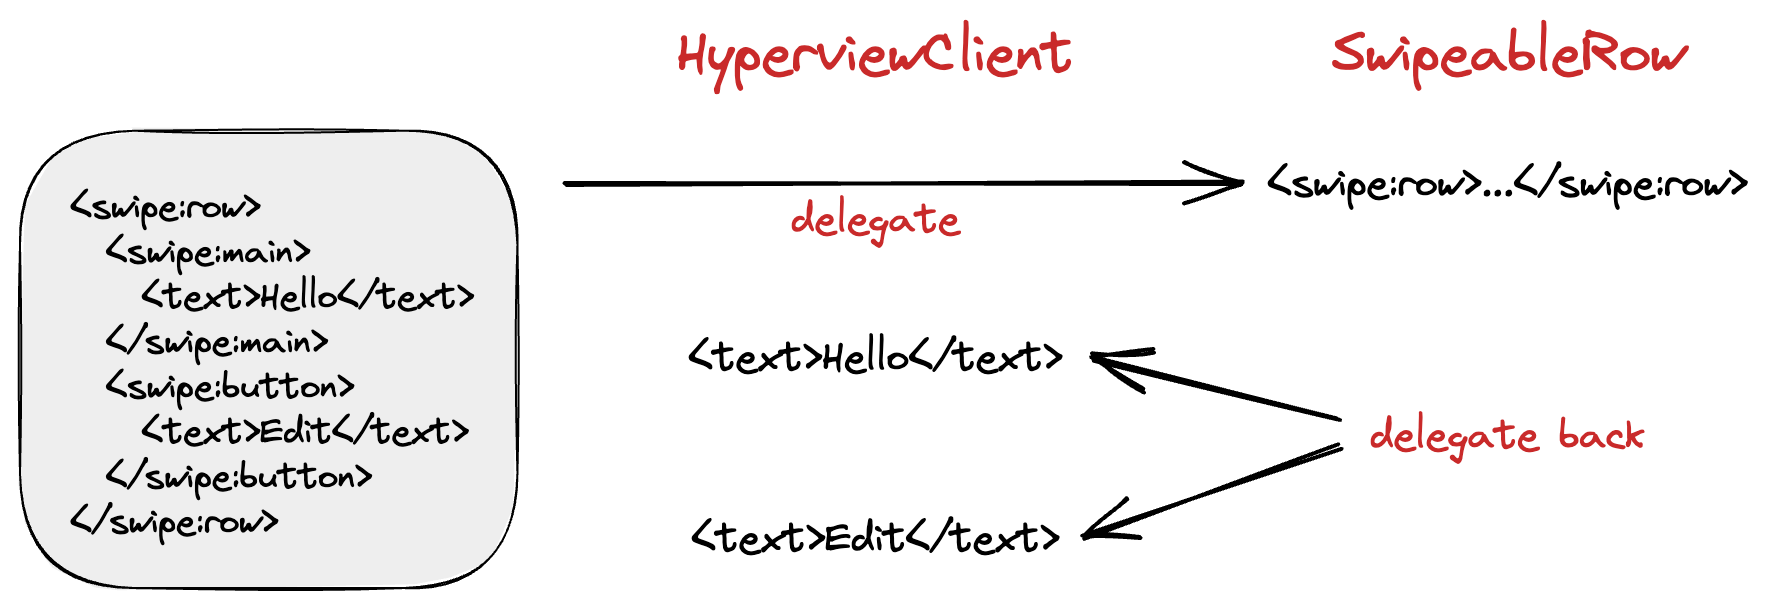 The HyperviewClient delegates to us to render XML swipe:row element. We delegate back to render text elements.